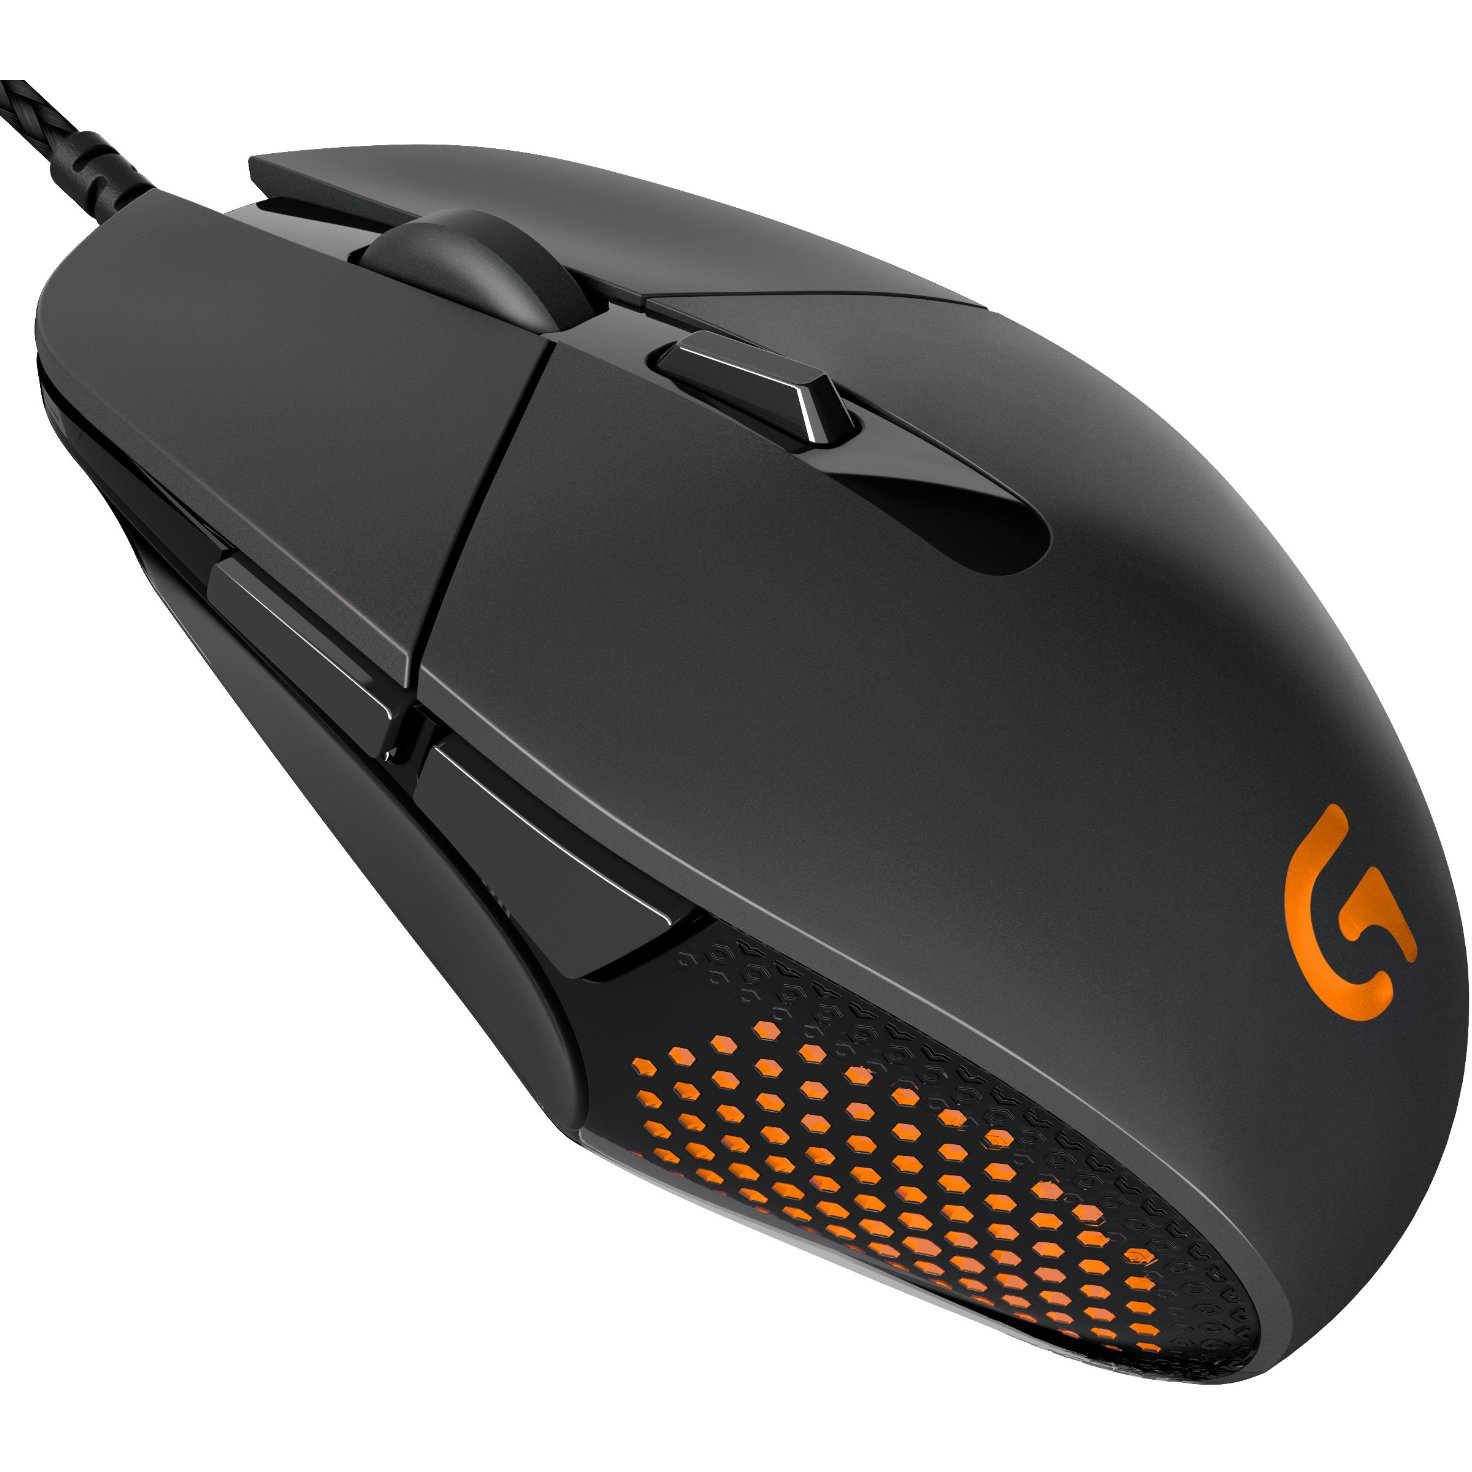  Mouse gaming Logitech G303 Daedalus Apex Performance Edition 